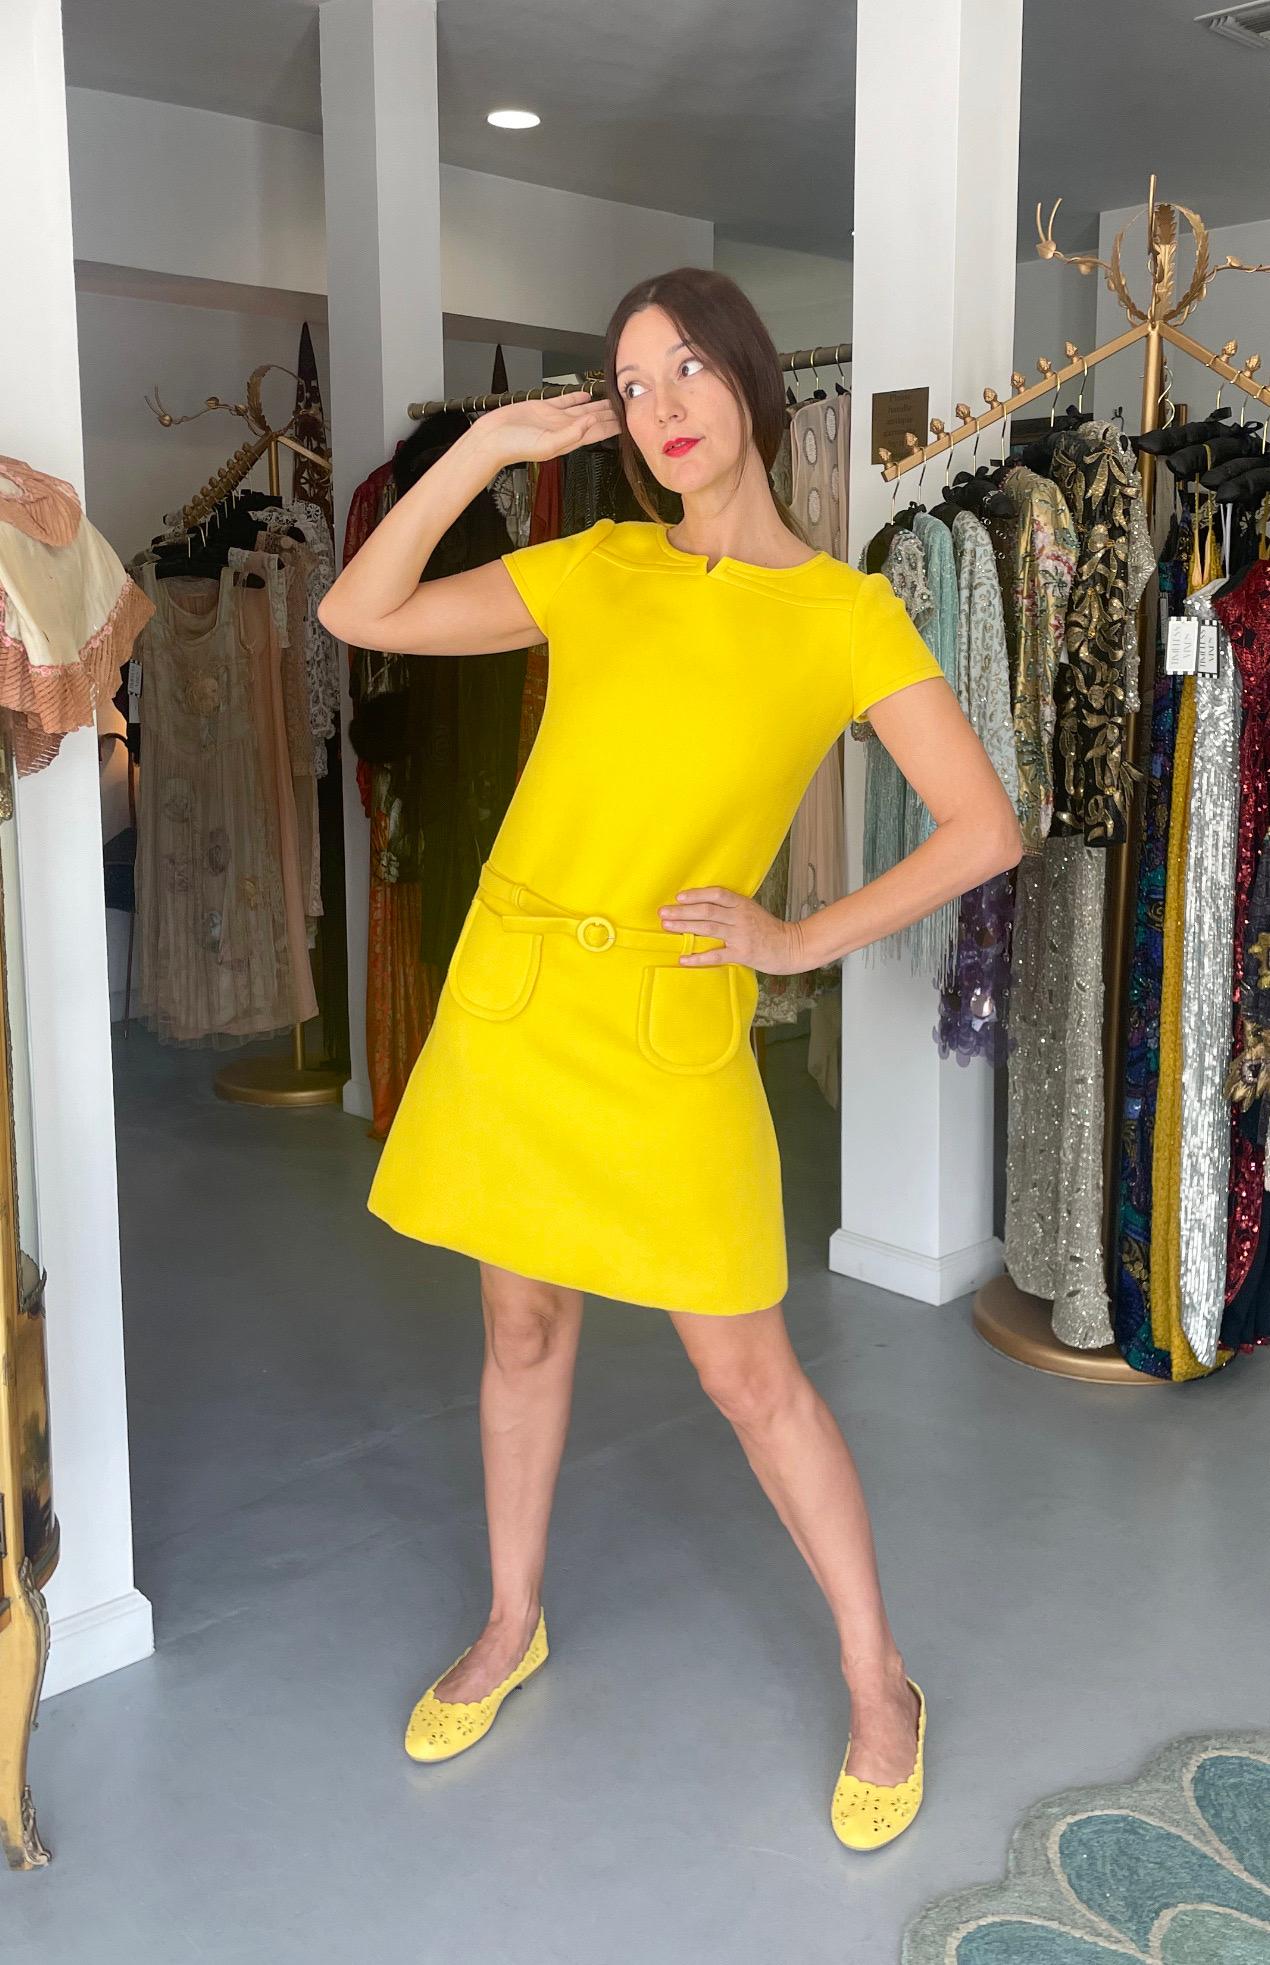 A spectacular and highly coveted André Courrèges haute couture vibrant sunshine yellow wool short-sleeve mod dress dating back to his 1968 fall/winter collection. As shown, the same dress in grey is archived at the FIT Museum and was apart of their